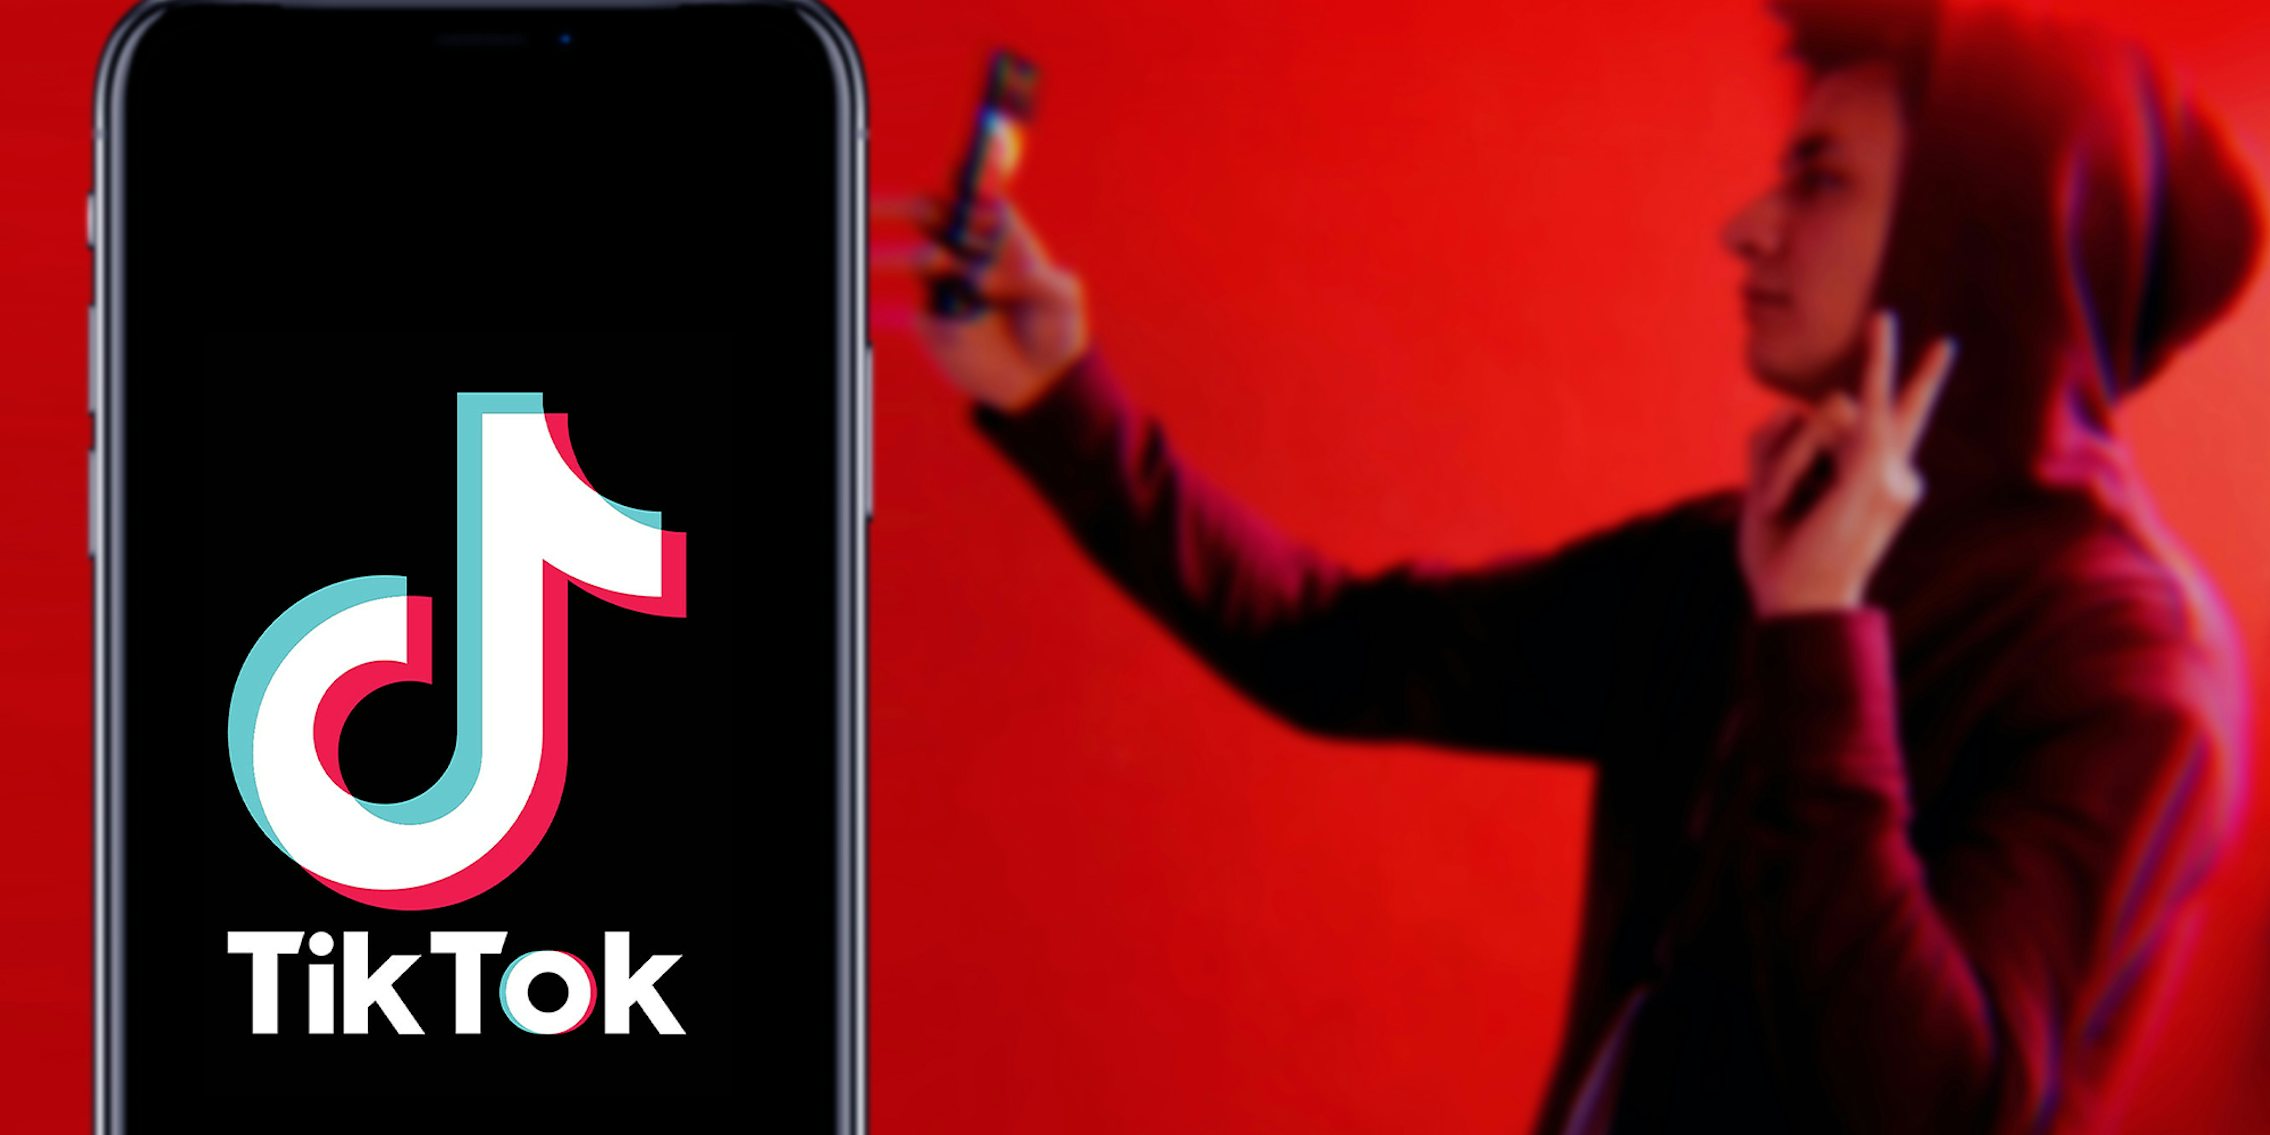 TikTok Logo on Phone display with young male taking selfie video